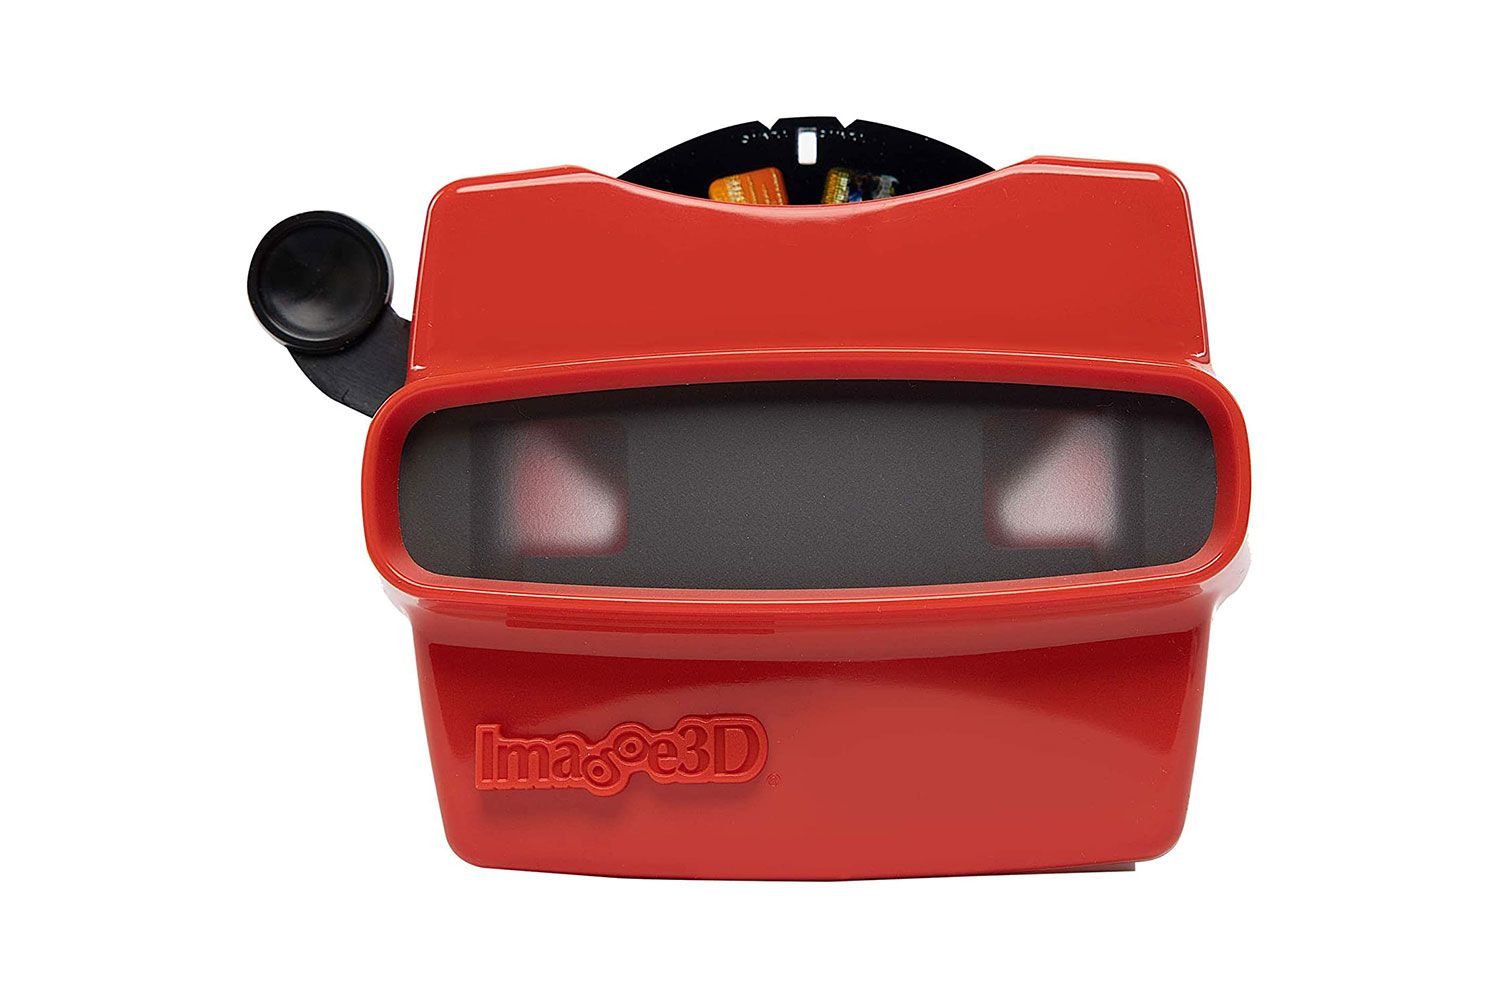 Amazon Uncommon Goods Create Your Own Reel Viewer